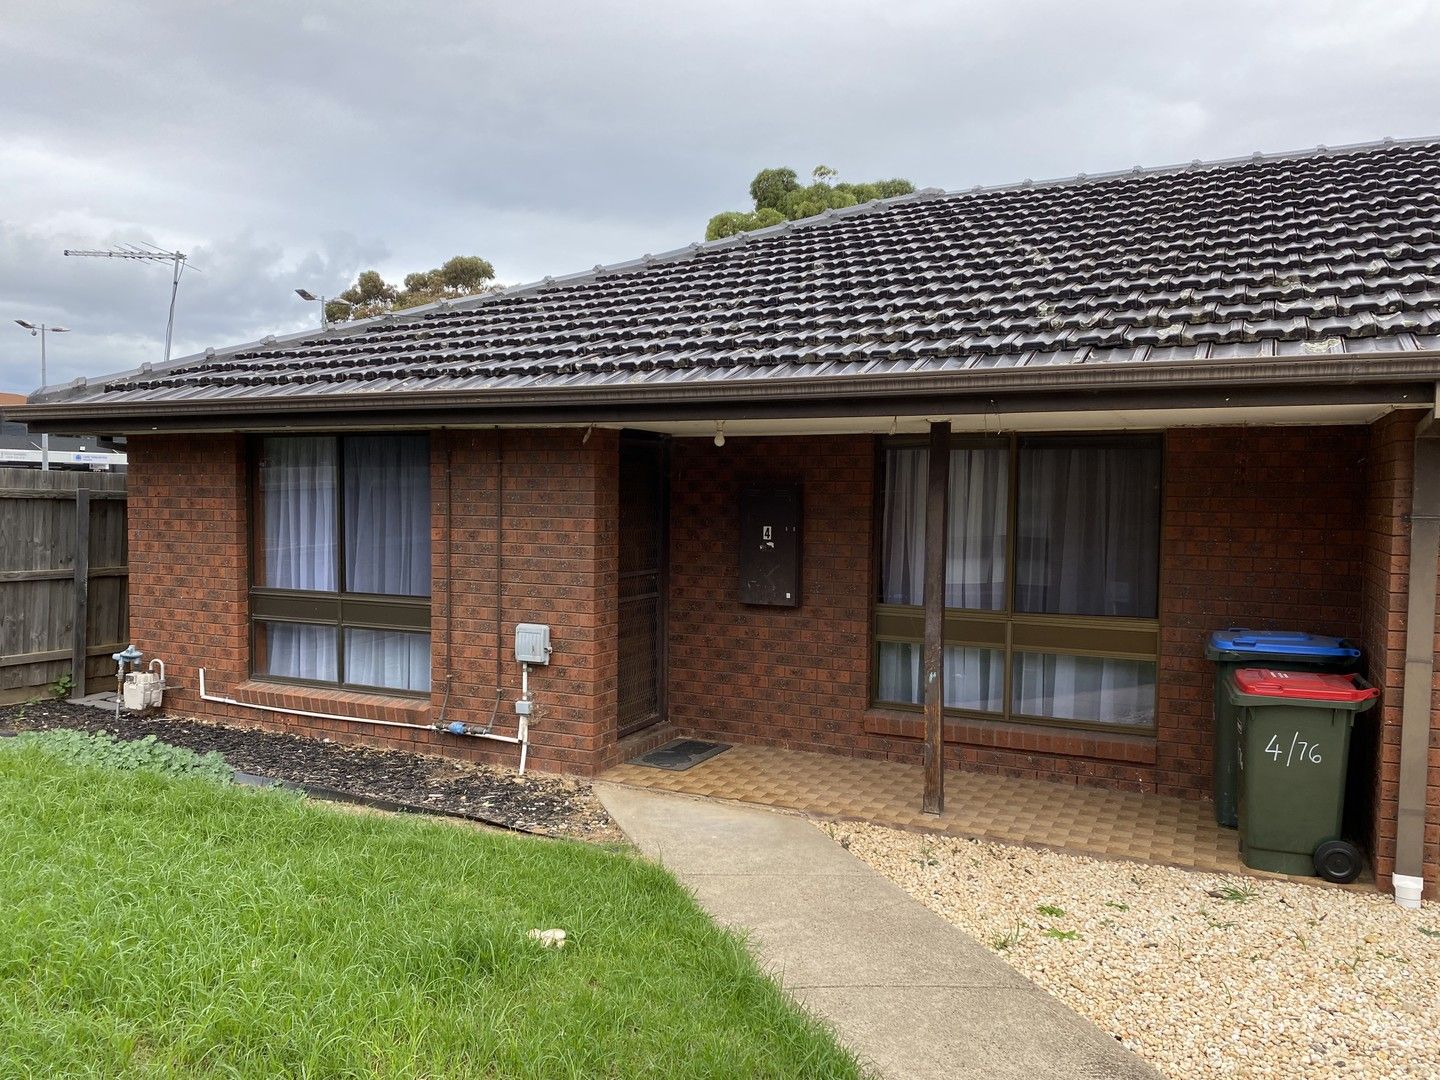 2 bedrooms Apartment / Unit / Flat in 4/76 Woodville Park Drive HOPPERS CROSSING VIC, 3029